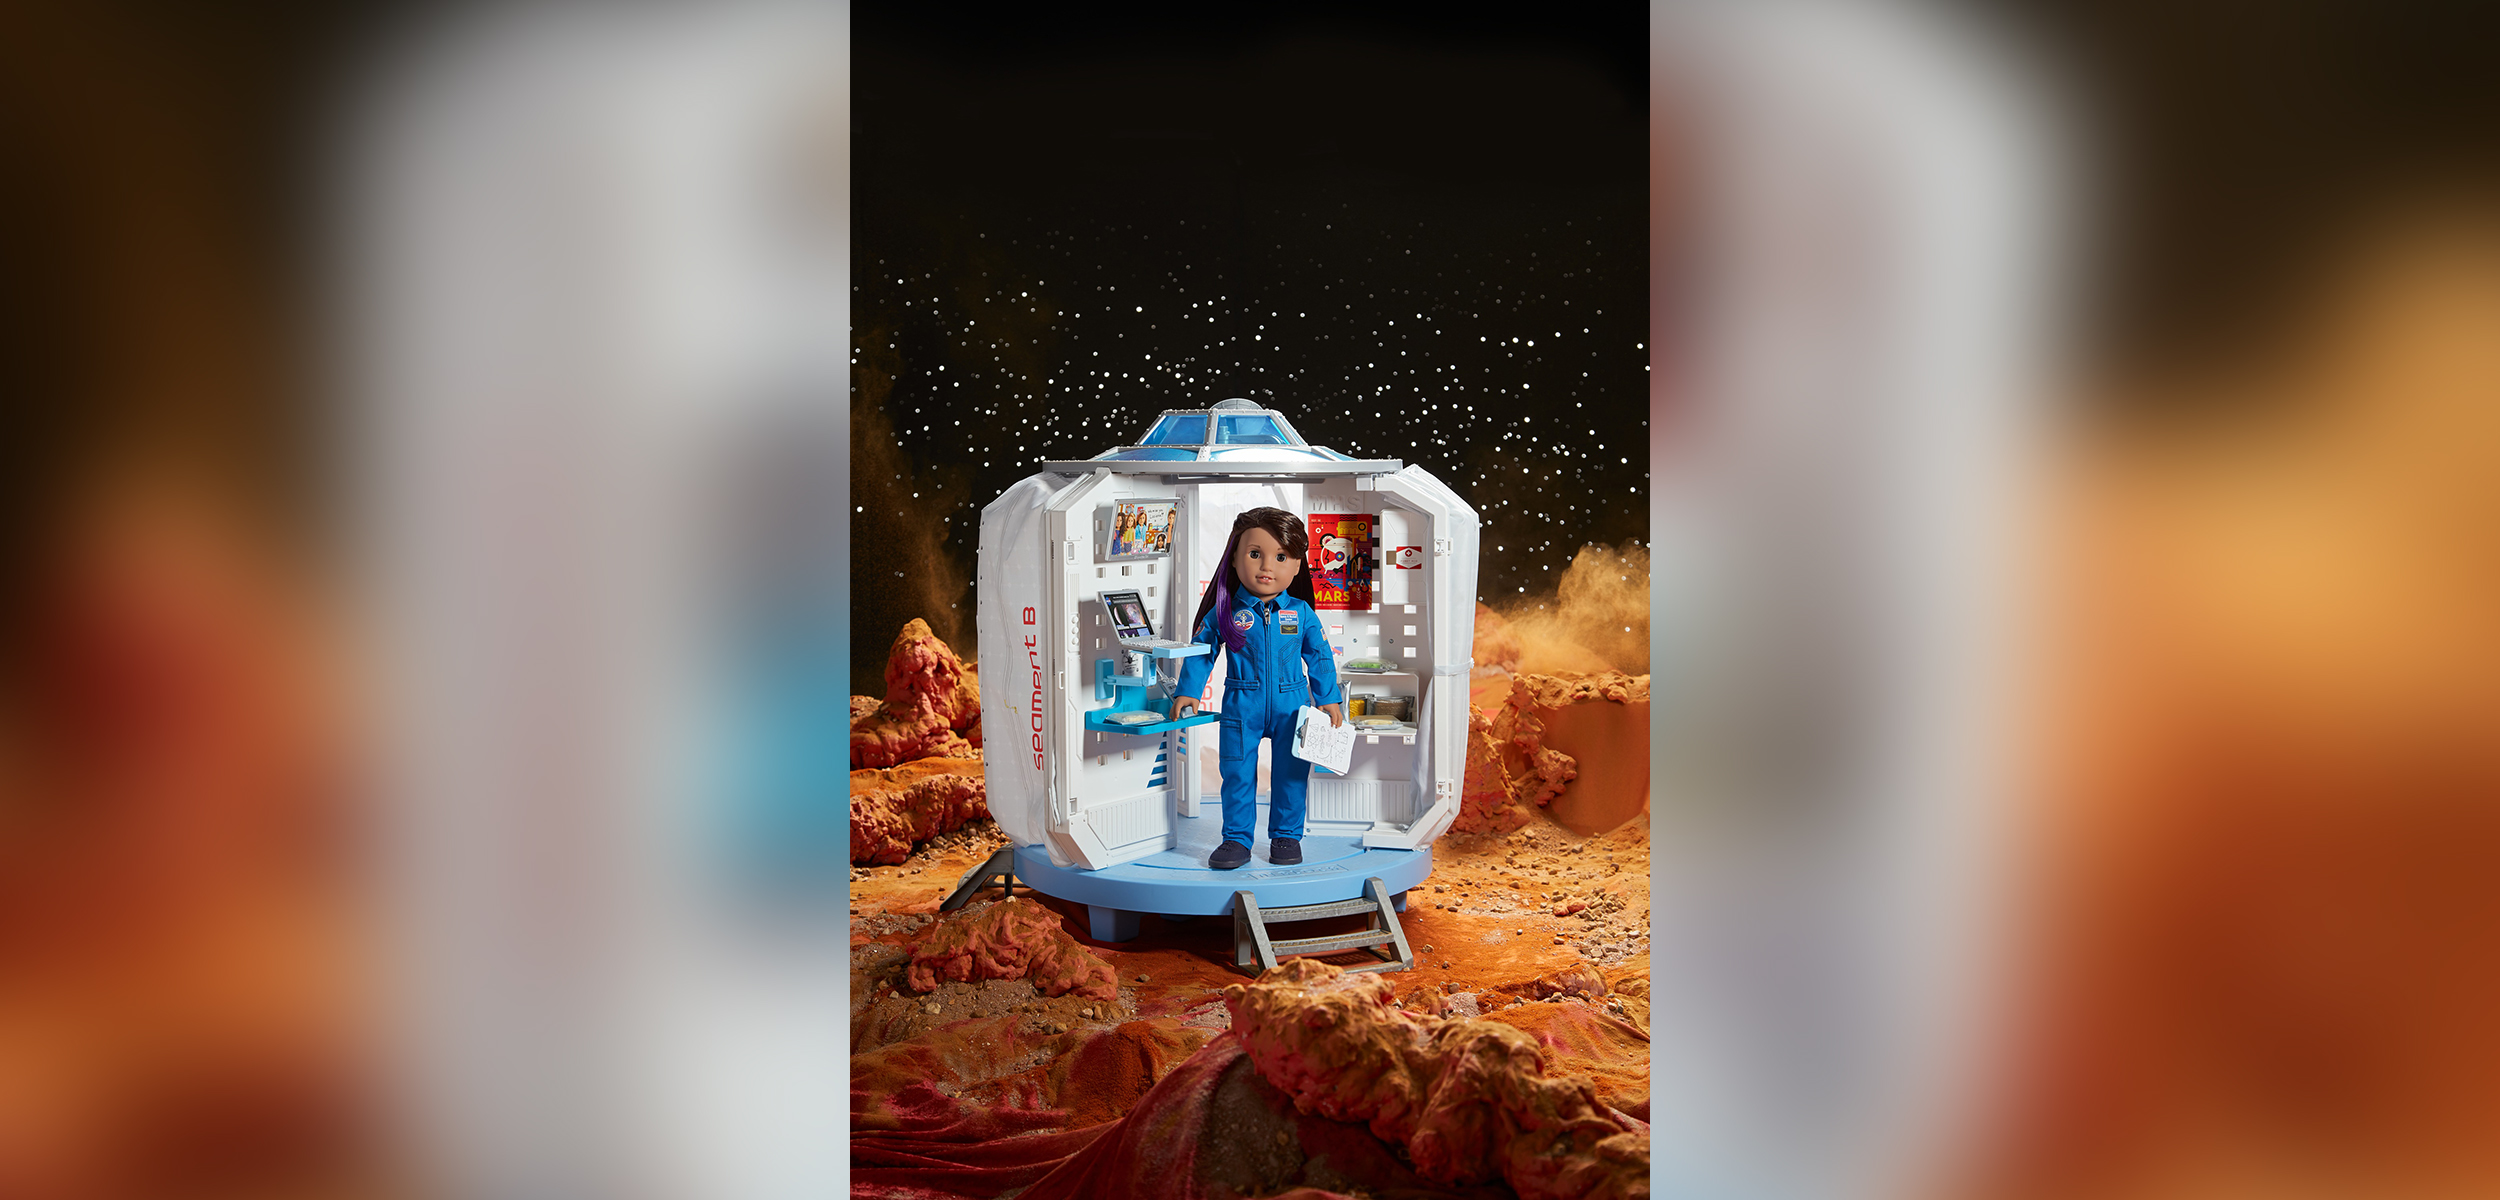 PHOTO:American Girl's 2018 girl of the year doll, who was revealed on "GMA" today, is Luciana Vega, an aspiring astronaut who hopes to be the first person to go to mars. 